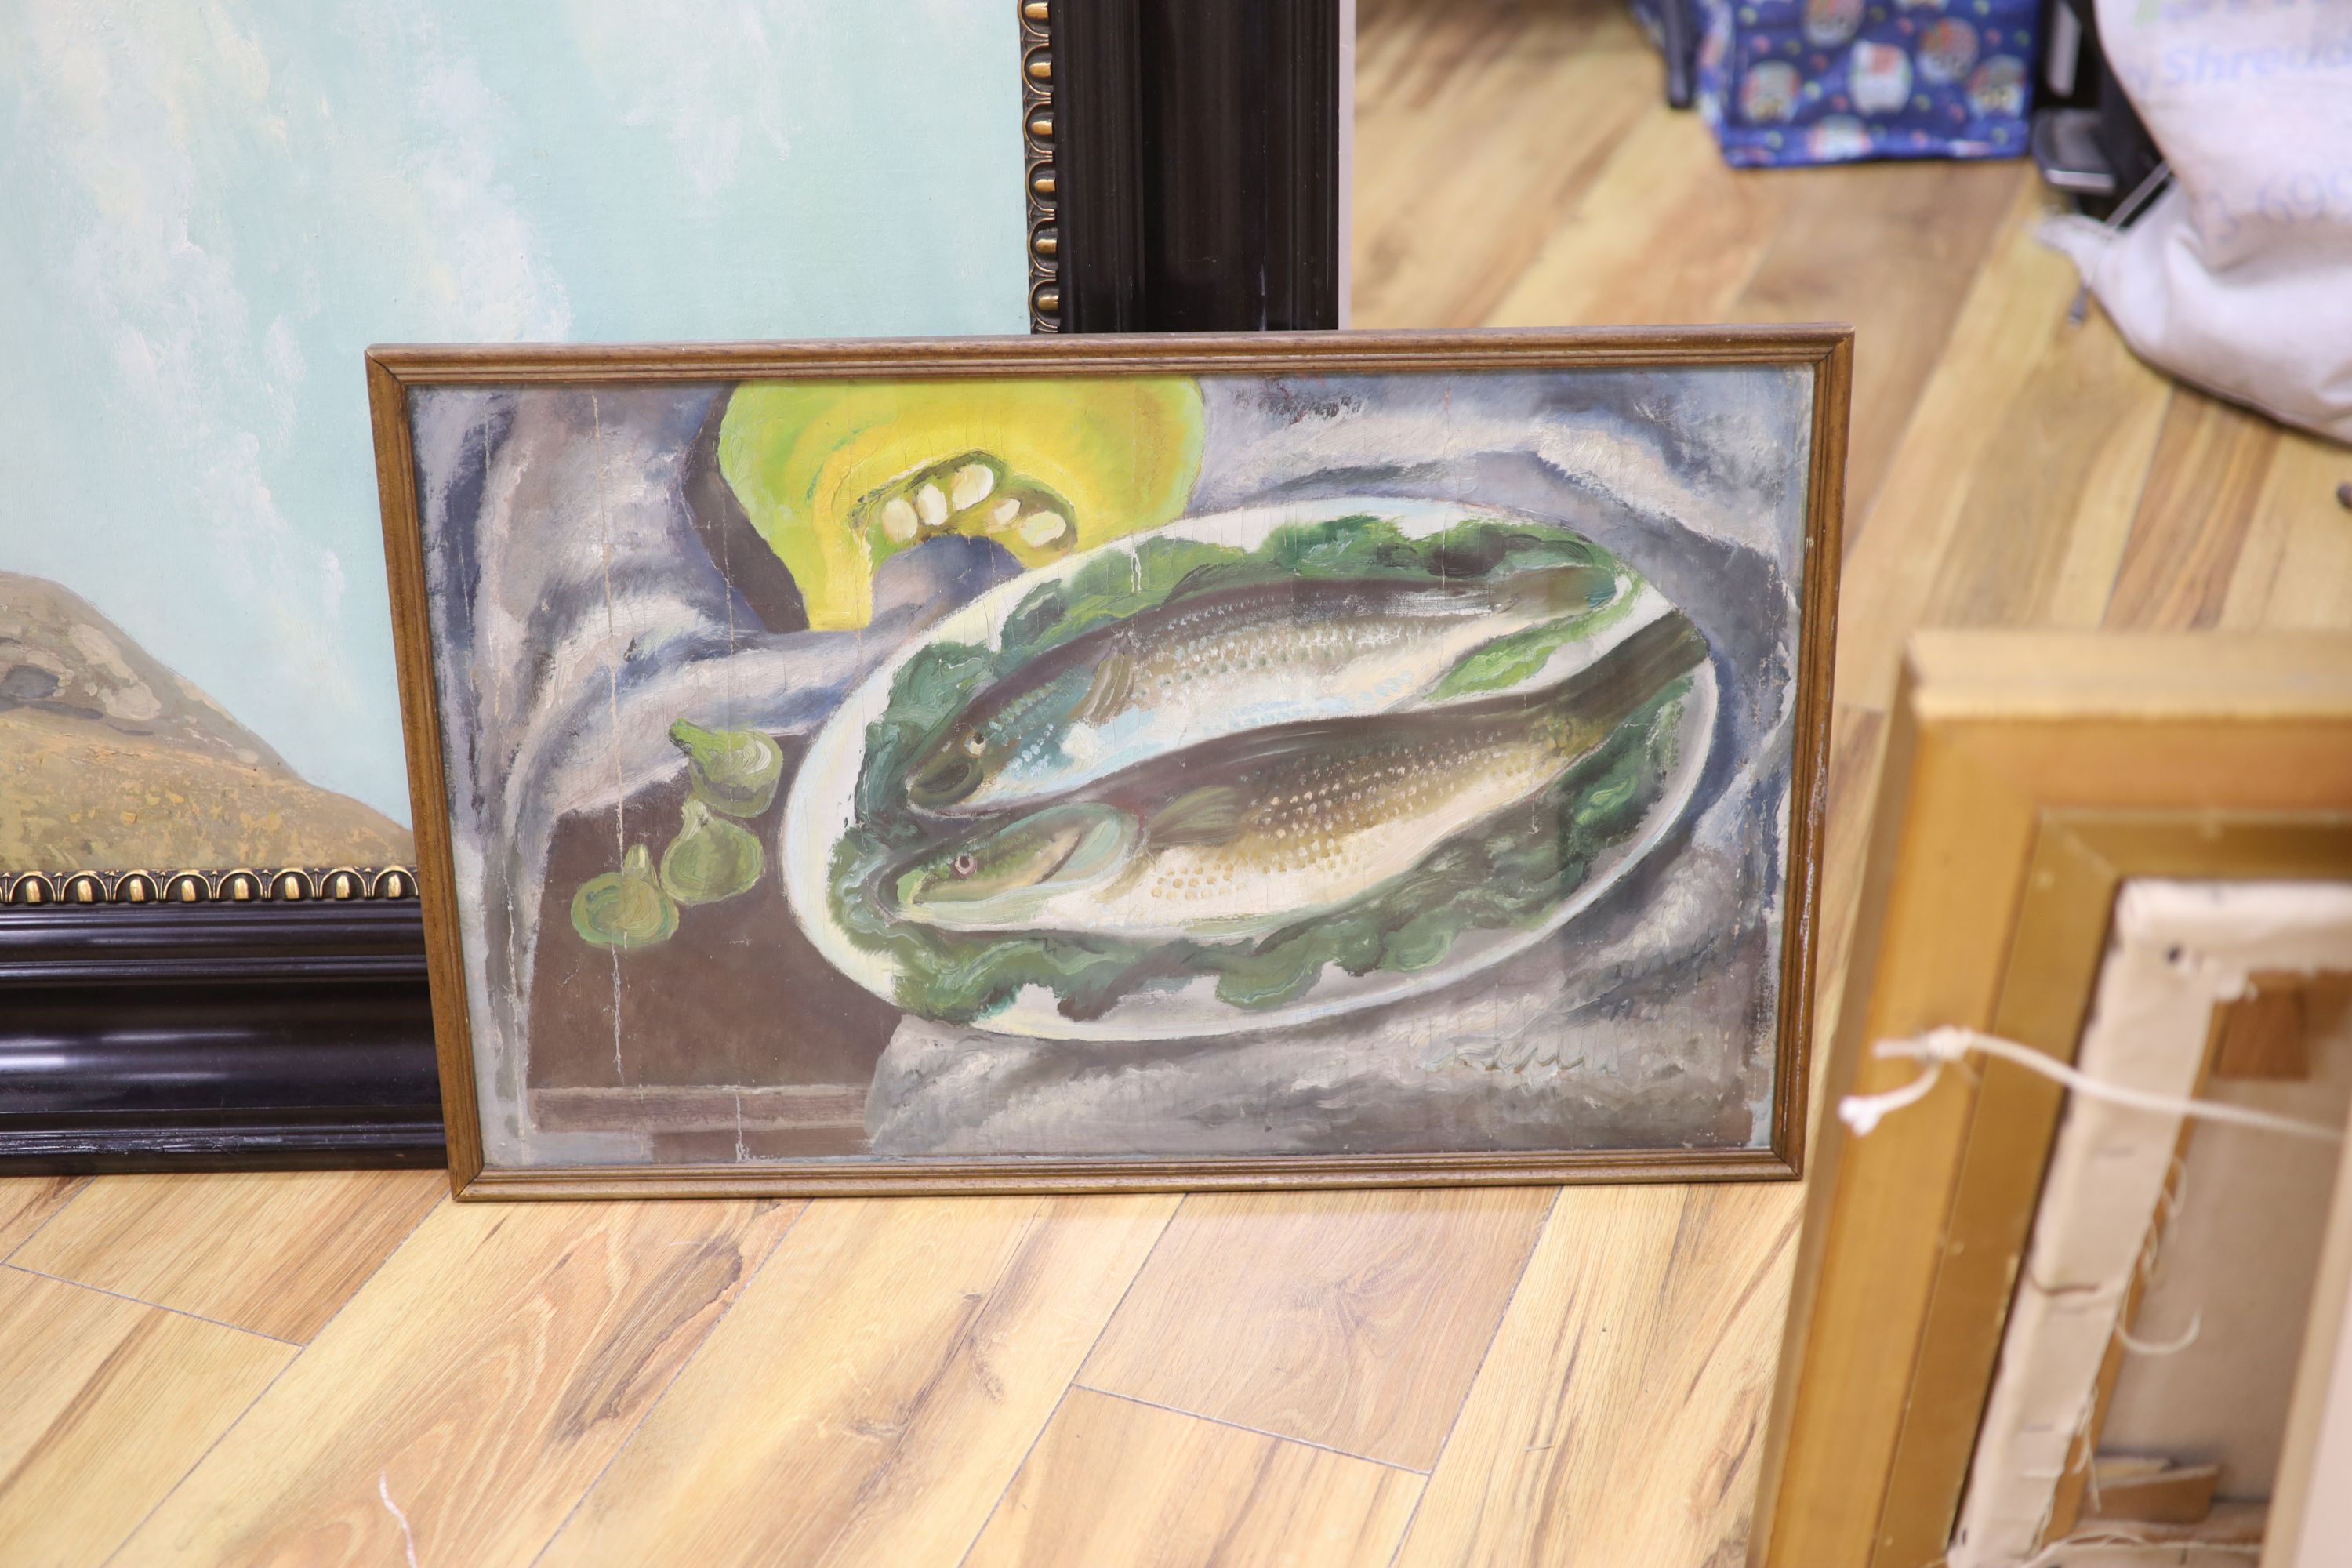 Early 20th century Continental School, still life with fish, oil on canvas (backed), framed and glazed, 37 x 59 cm